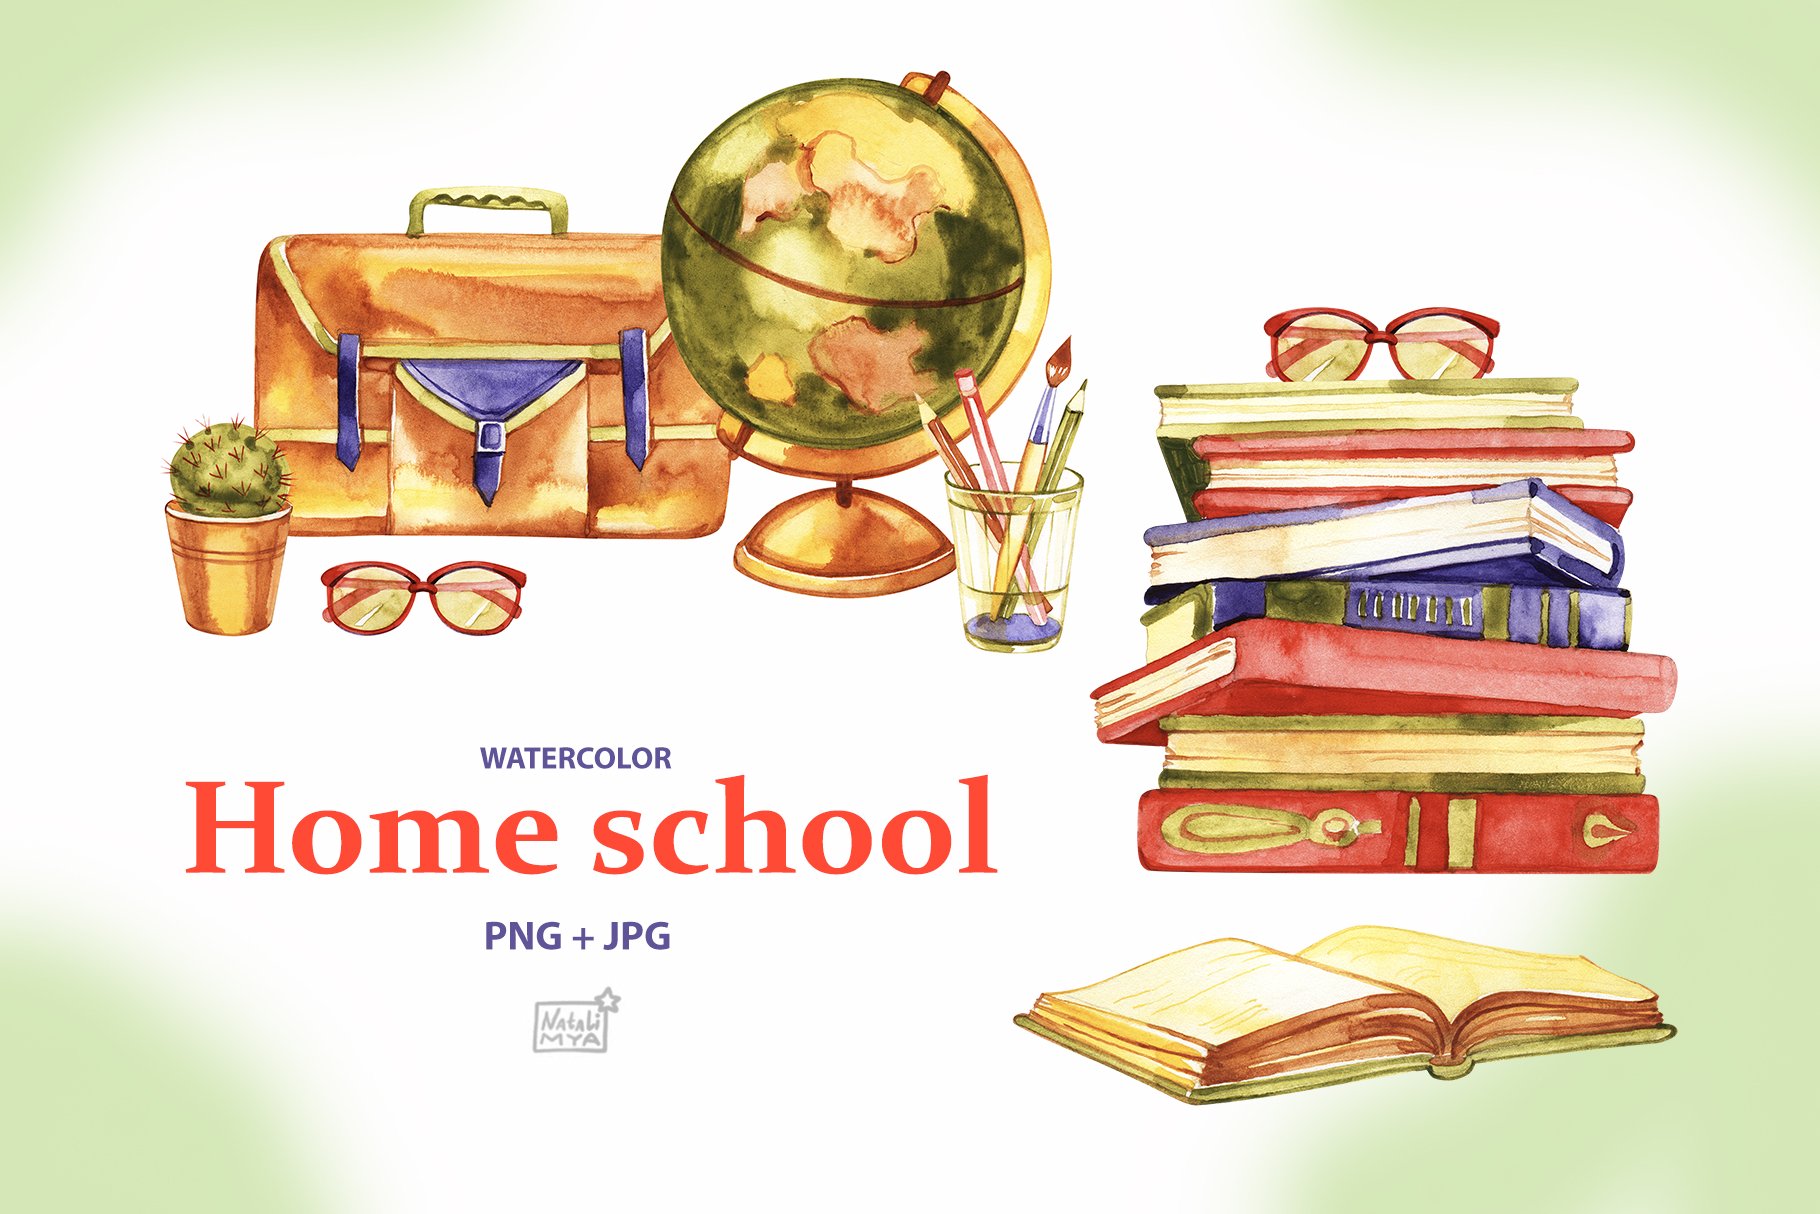 Watercolor home school cliparts cover image.